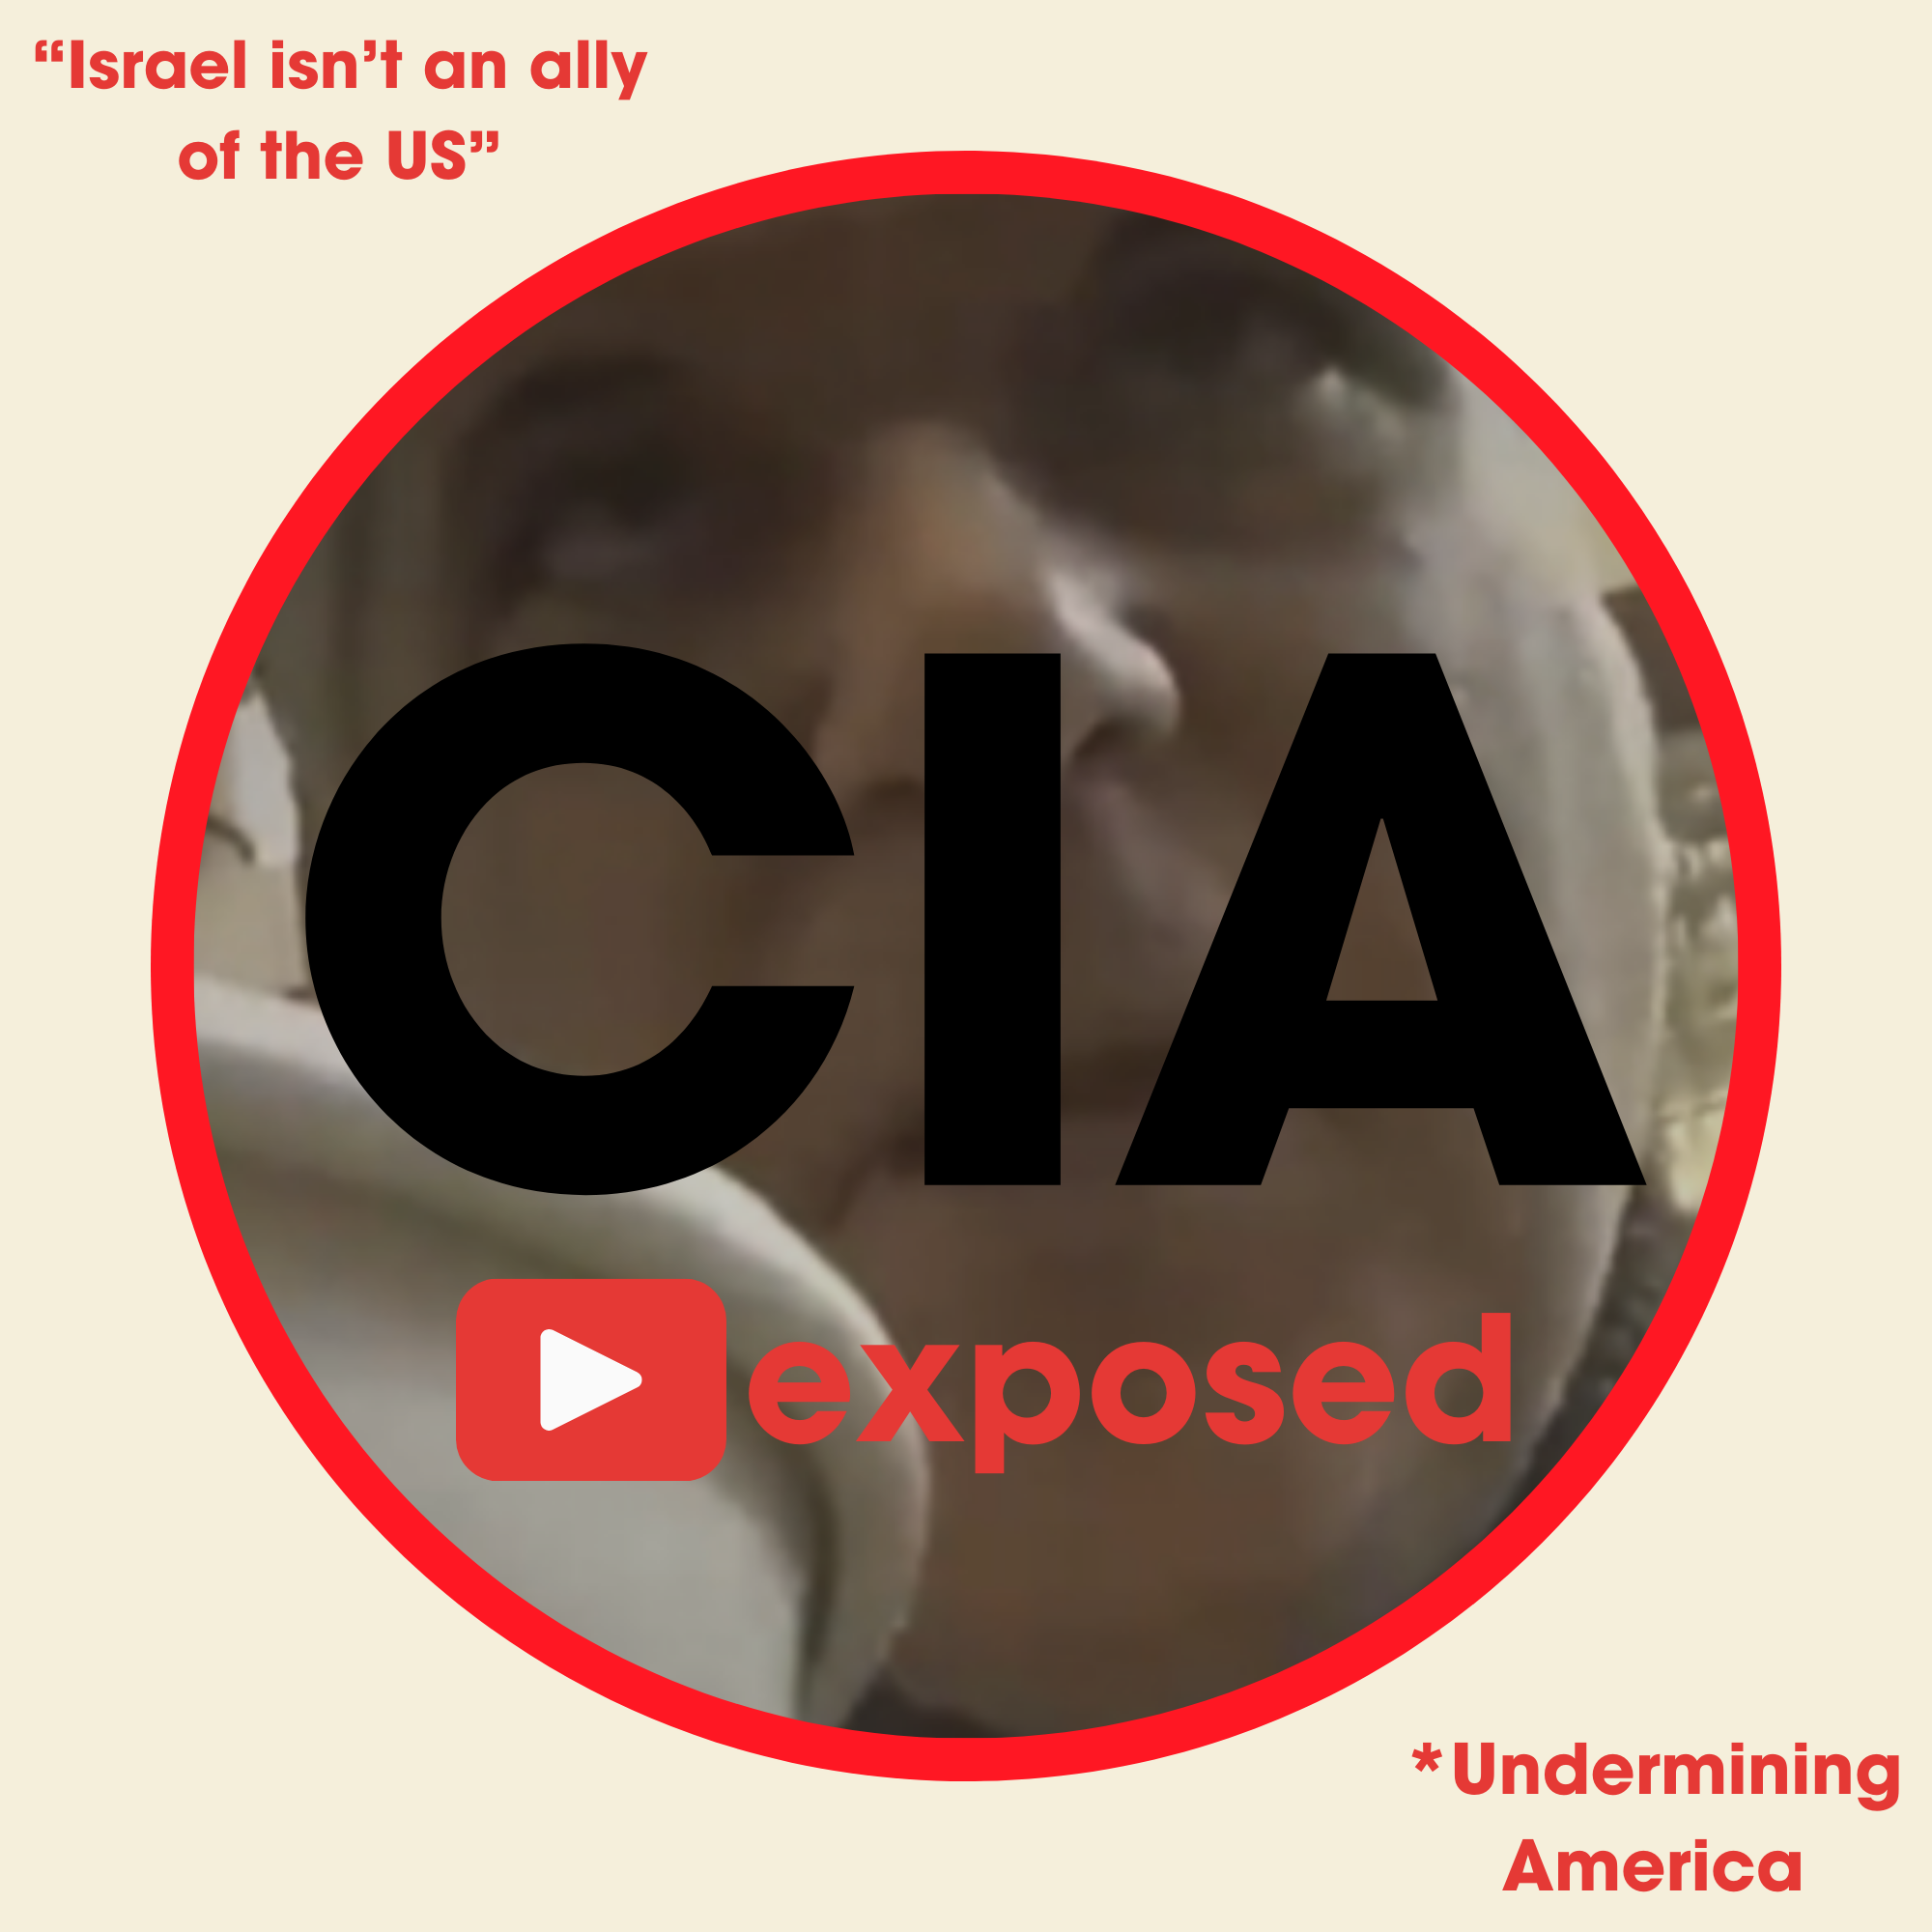 James O’Keefe Exposes CIA In Undercover Footage